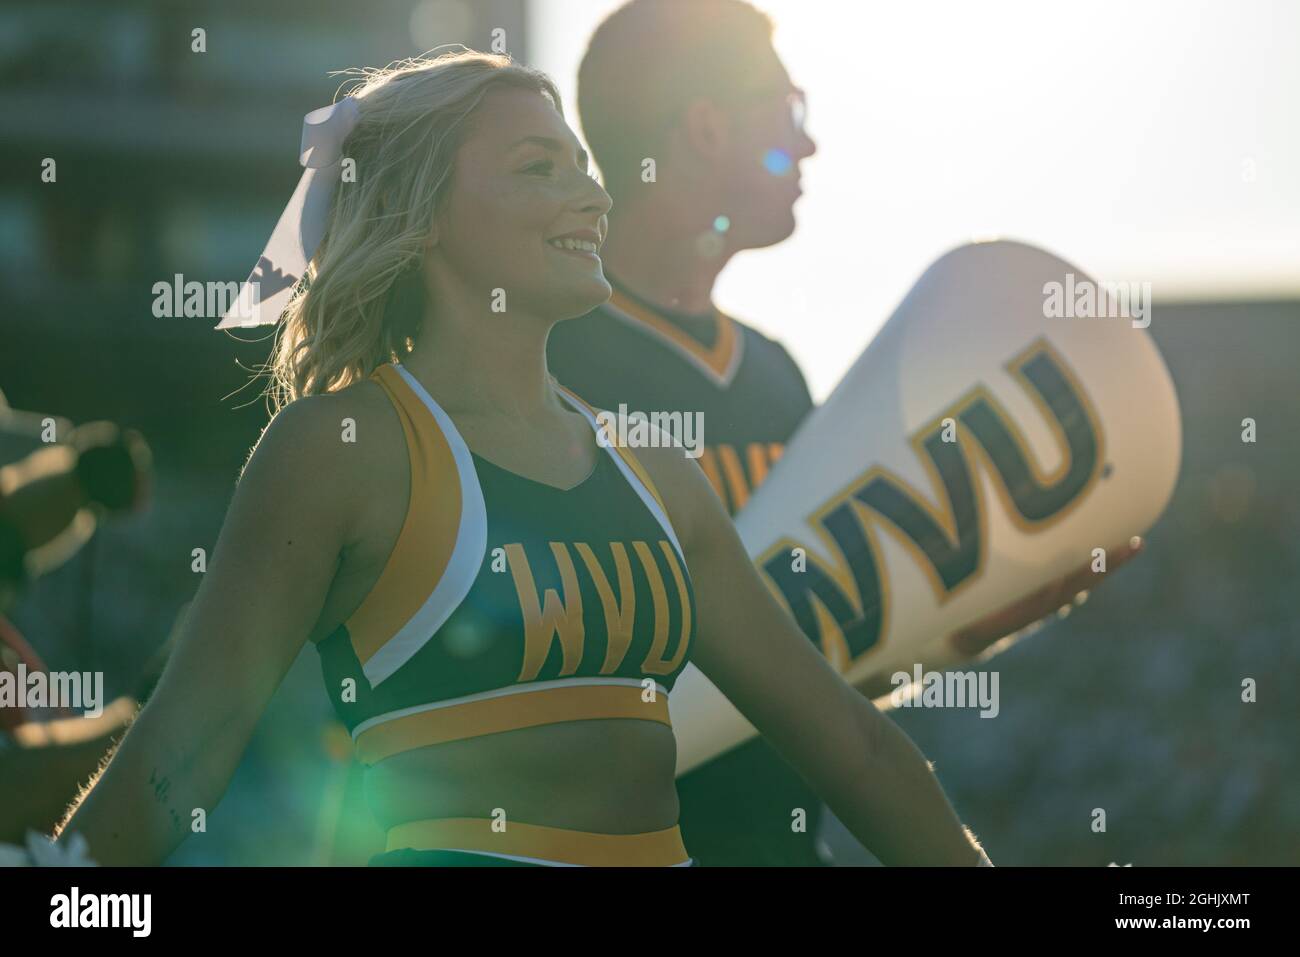 A West Virginia Mountaineers cheerleader performs during the NCAA college football game between West Virginia and Maryland on Saturday September 4, 2021 at Capital One Field at Maryland Stadium in College Park, MD. Jacob Kupferman/CSM Stock Photo